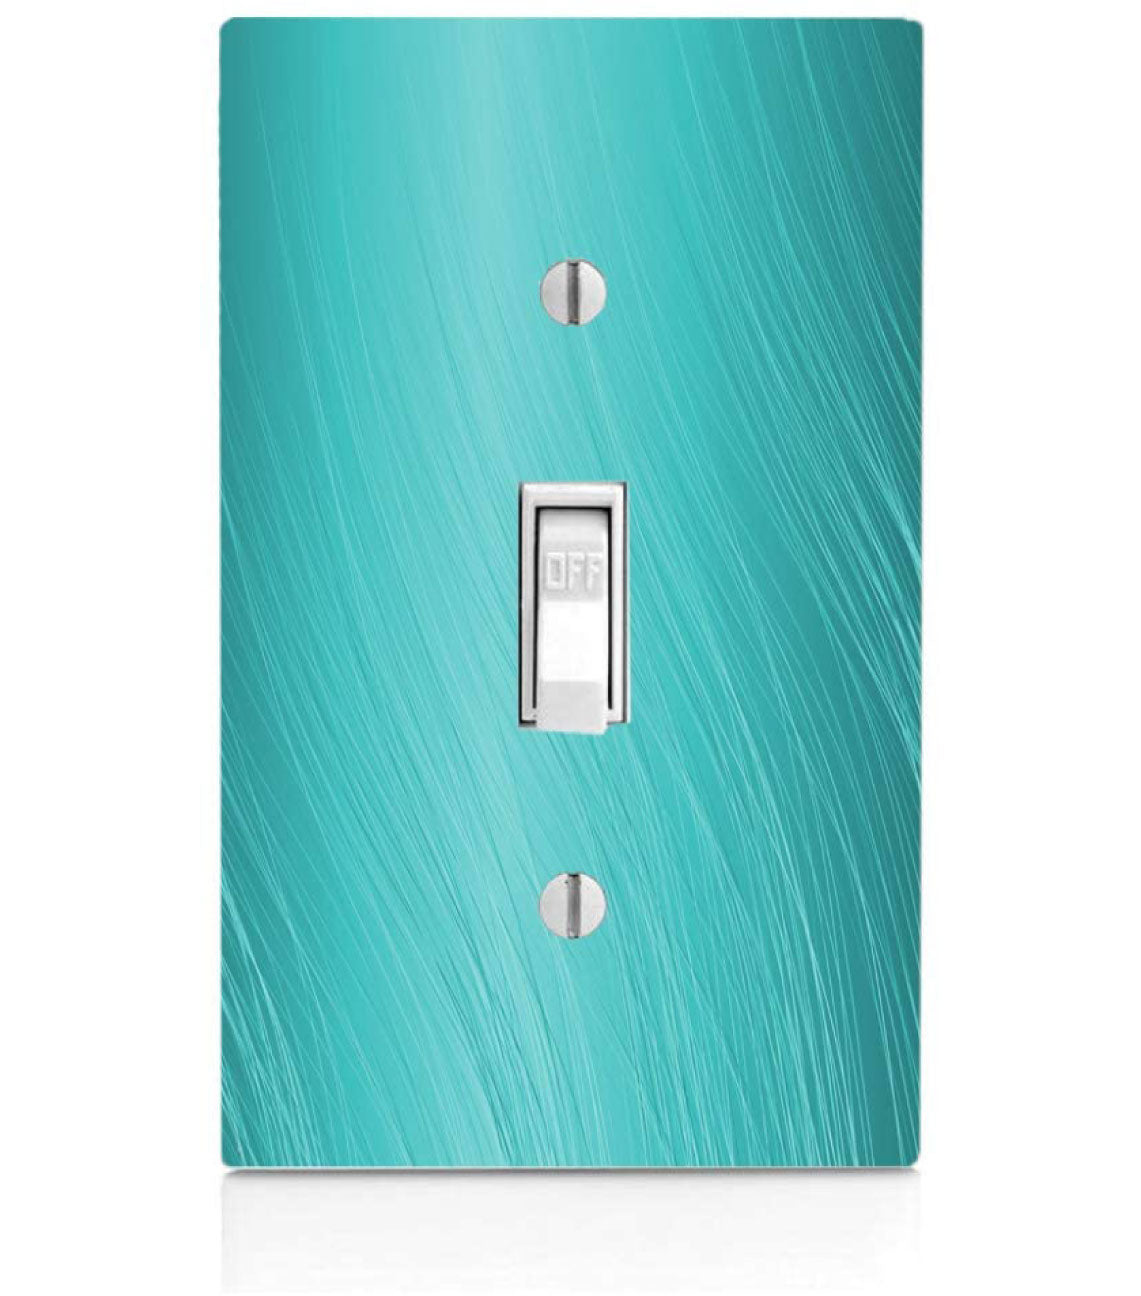 Wavy Lines Design Blue Teal Aqua, Plastic Single Toggle Light Plate Switch Wall Plate, 2.75 x 4.5 inches